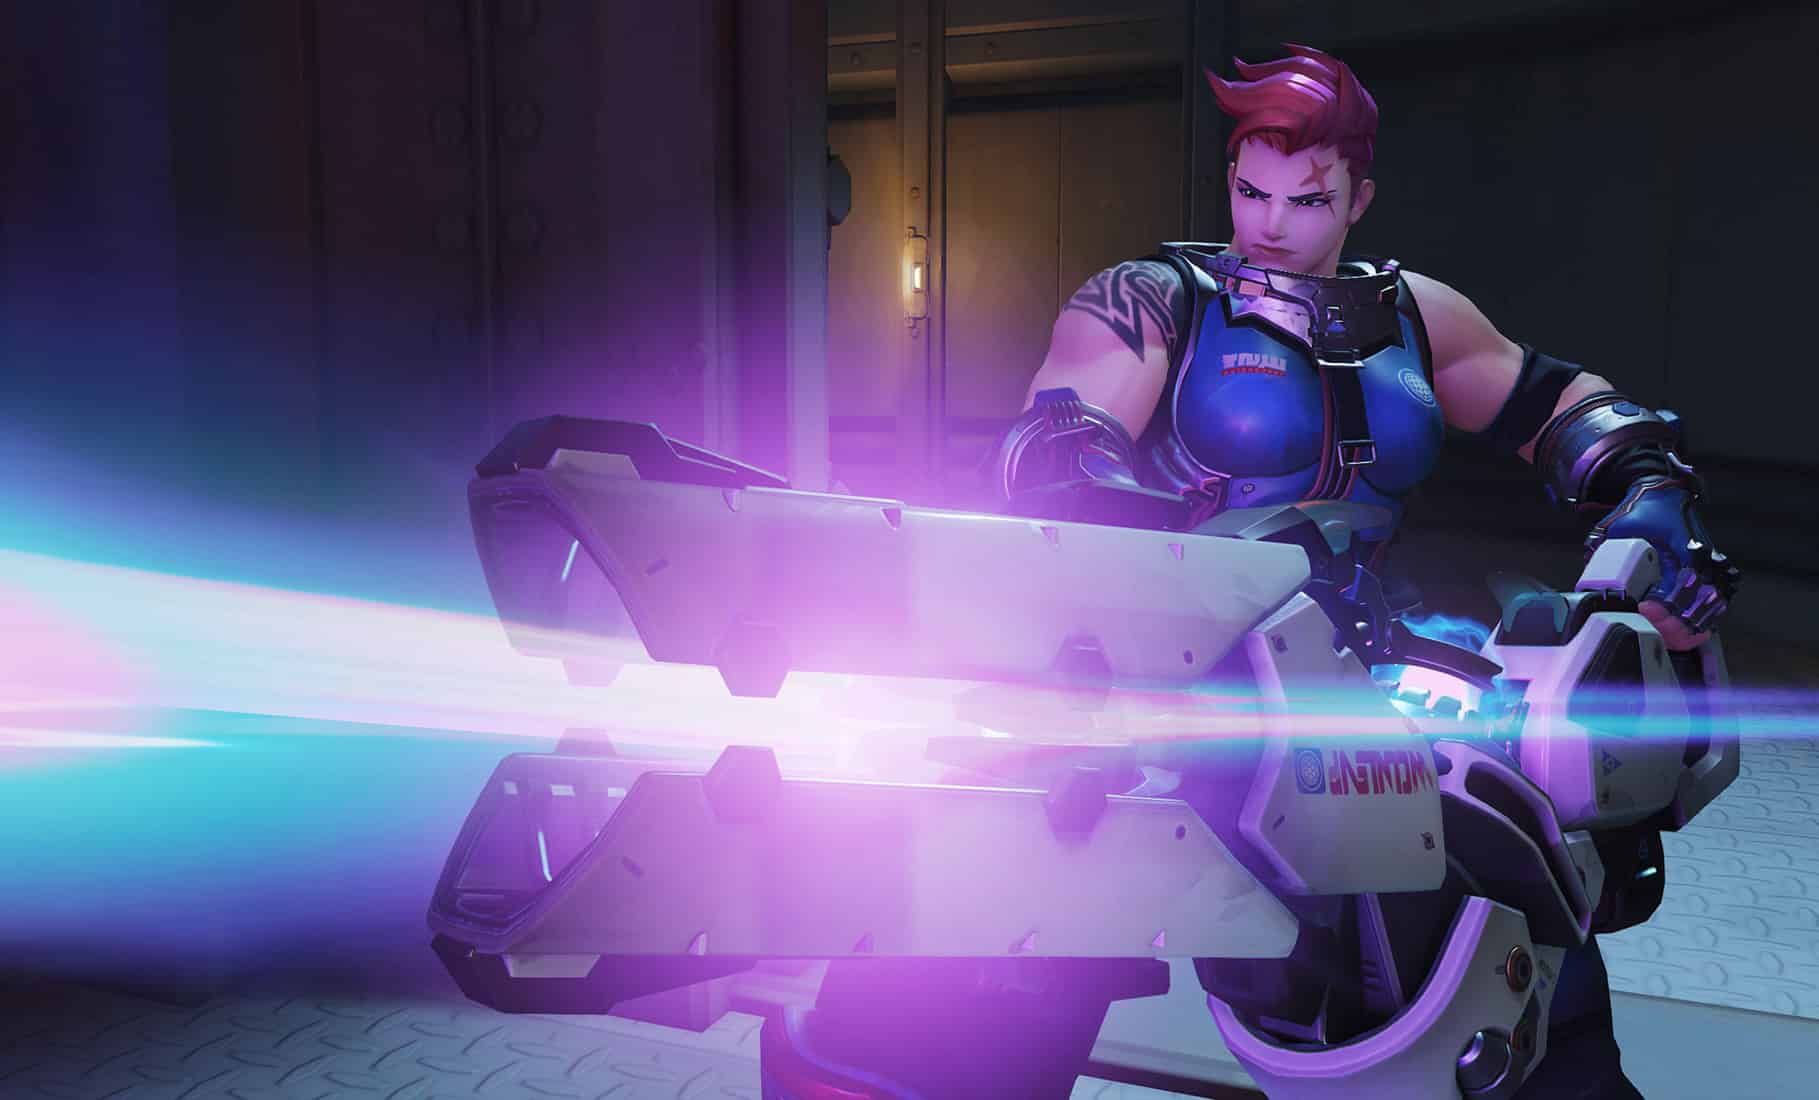 Overwatch Zarya firing particle cannon